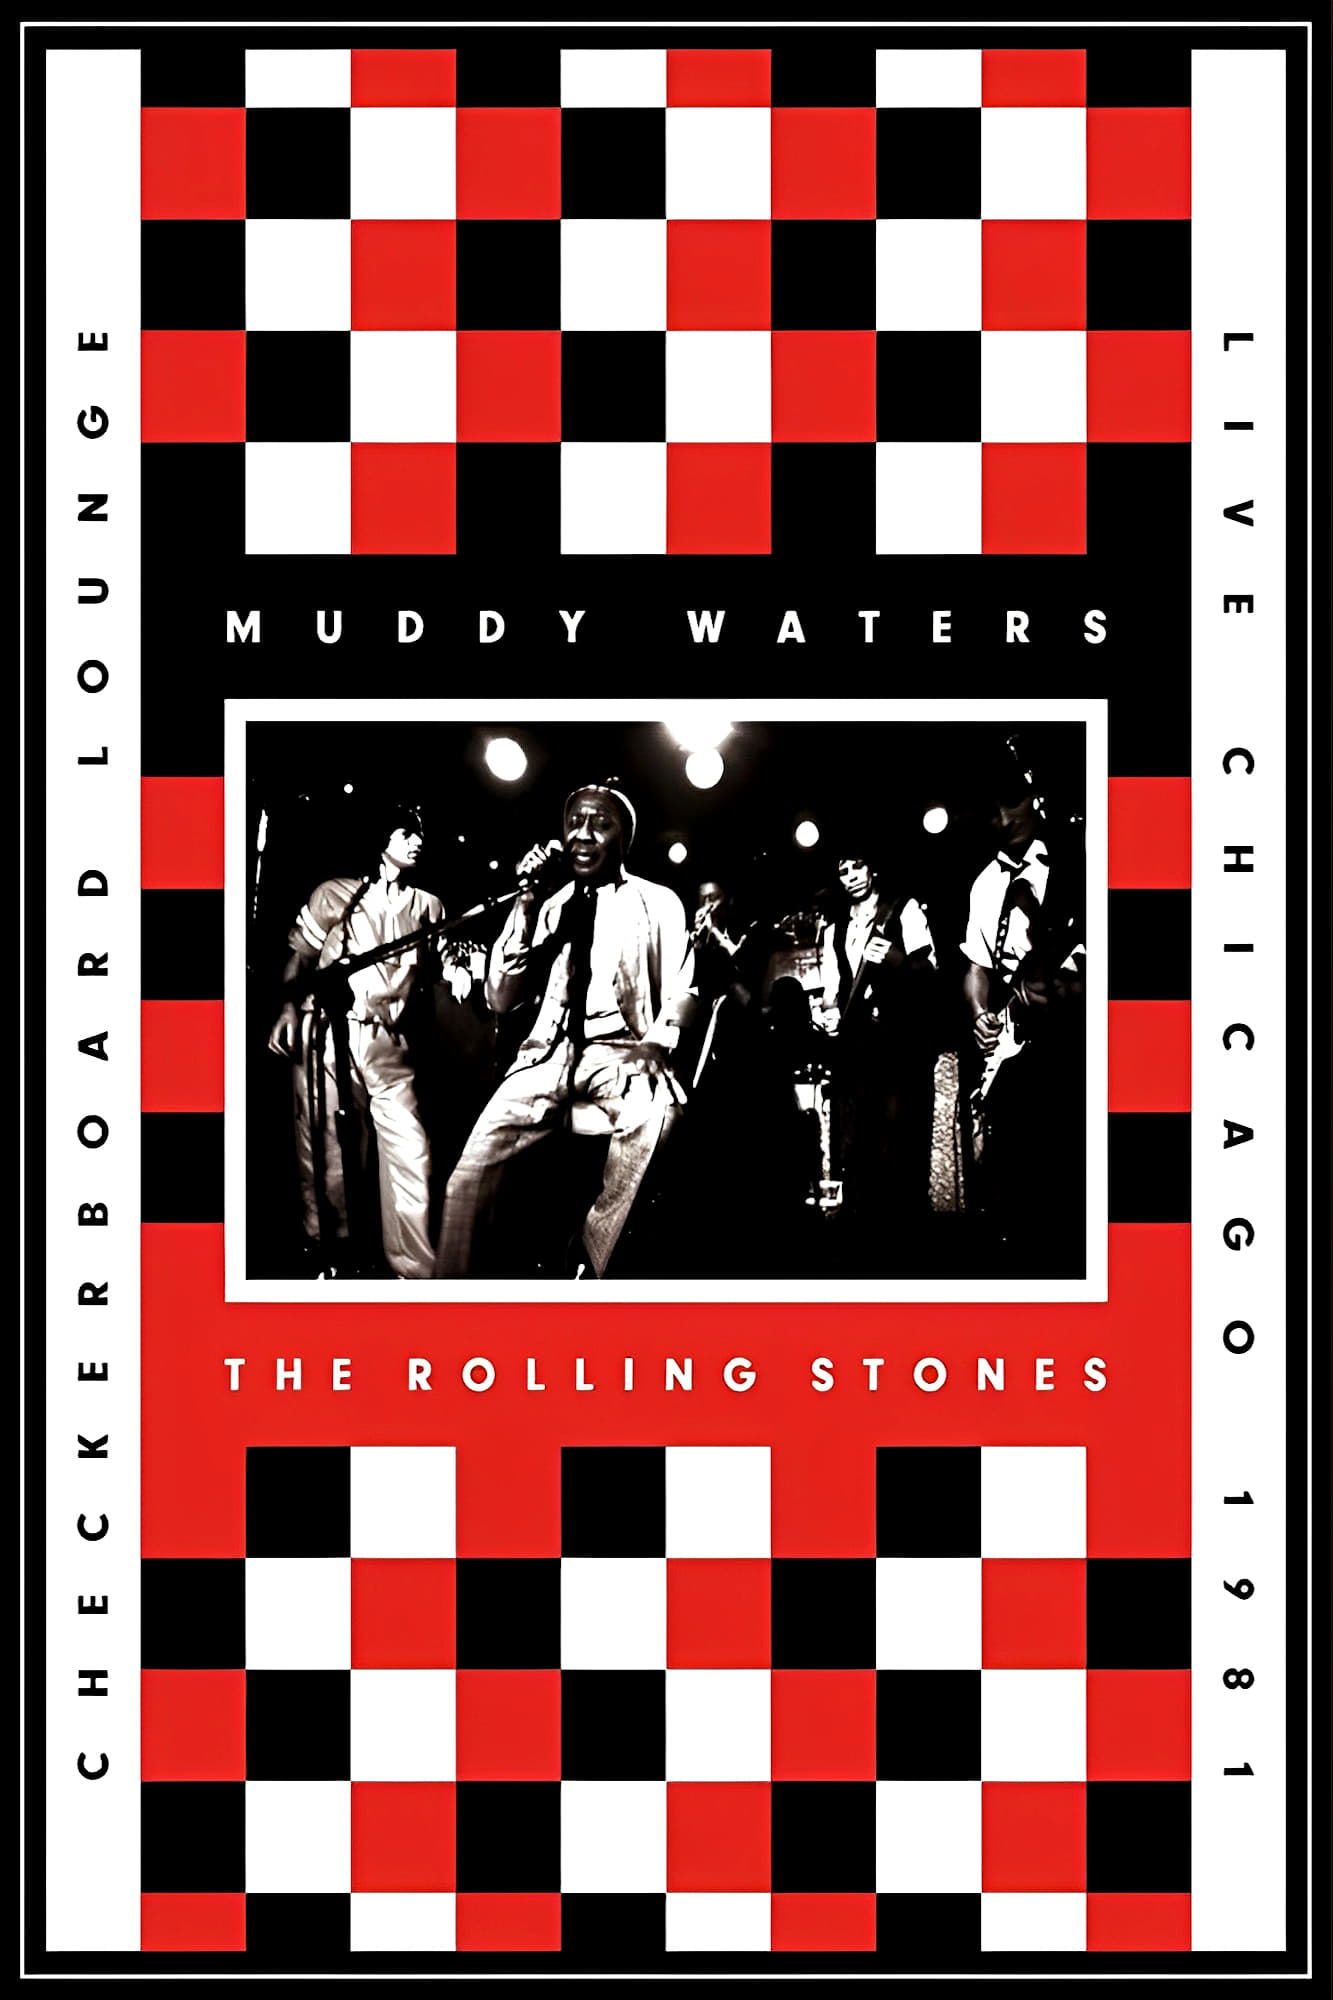 Muddy Waters & The Rolling Stones - Live Chicago 1981